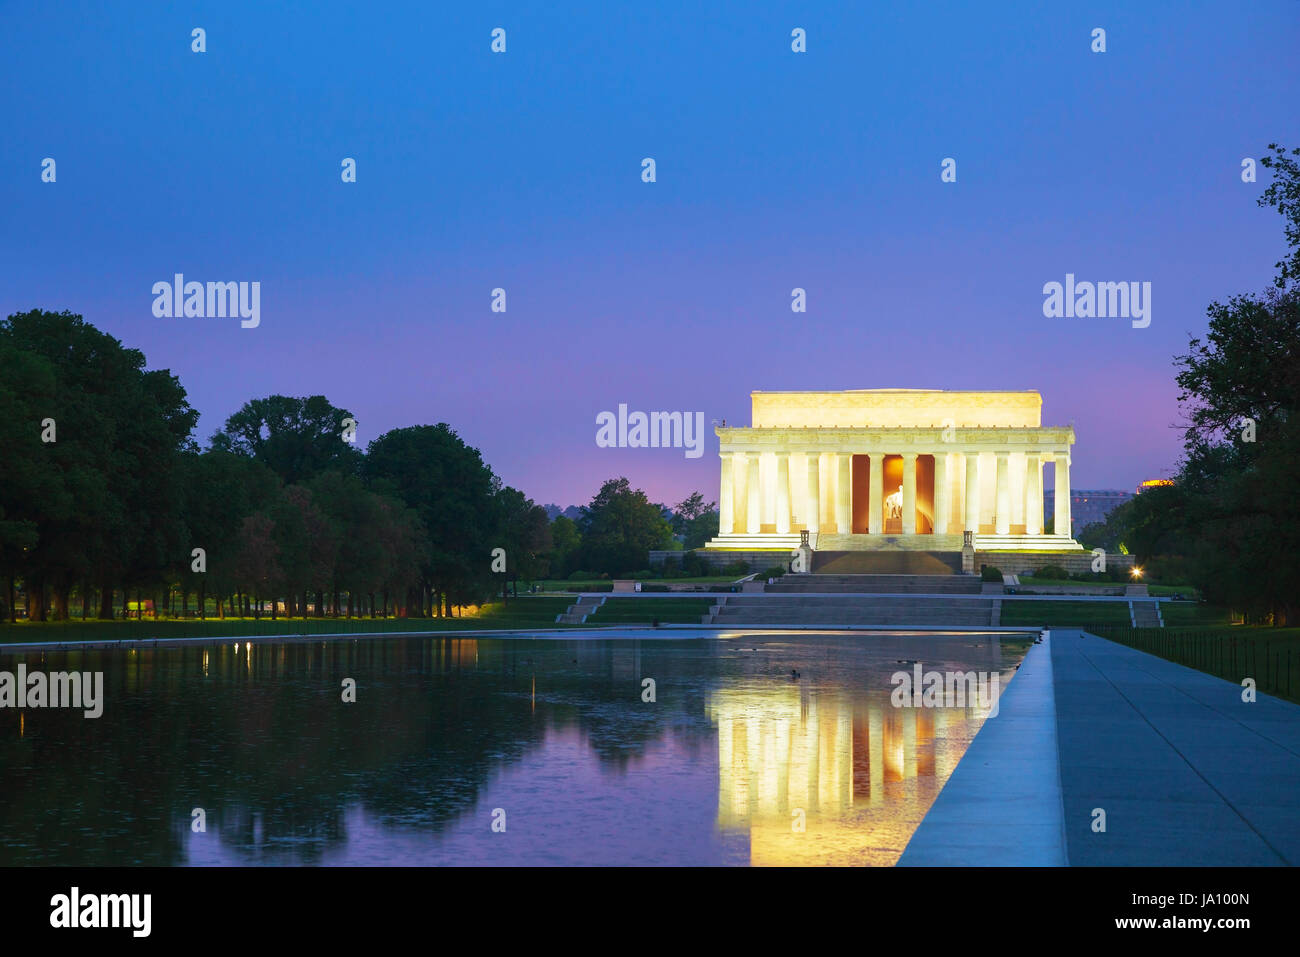 blue, monument, memorial, famous, american, night, nighttime, tourism, Stock Photo